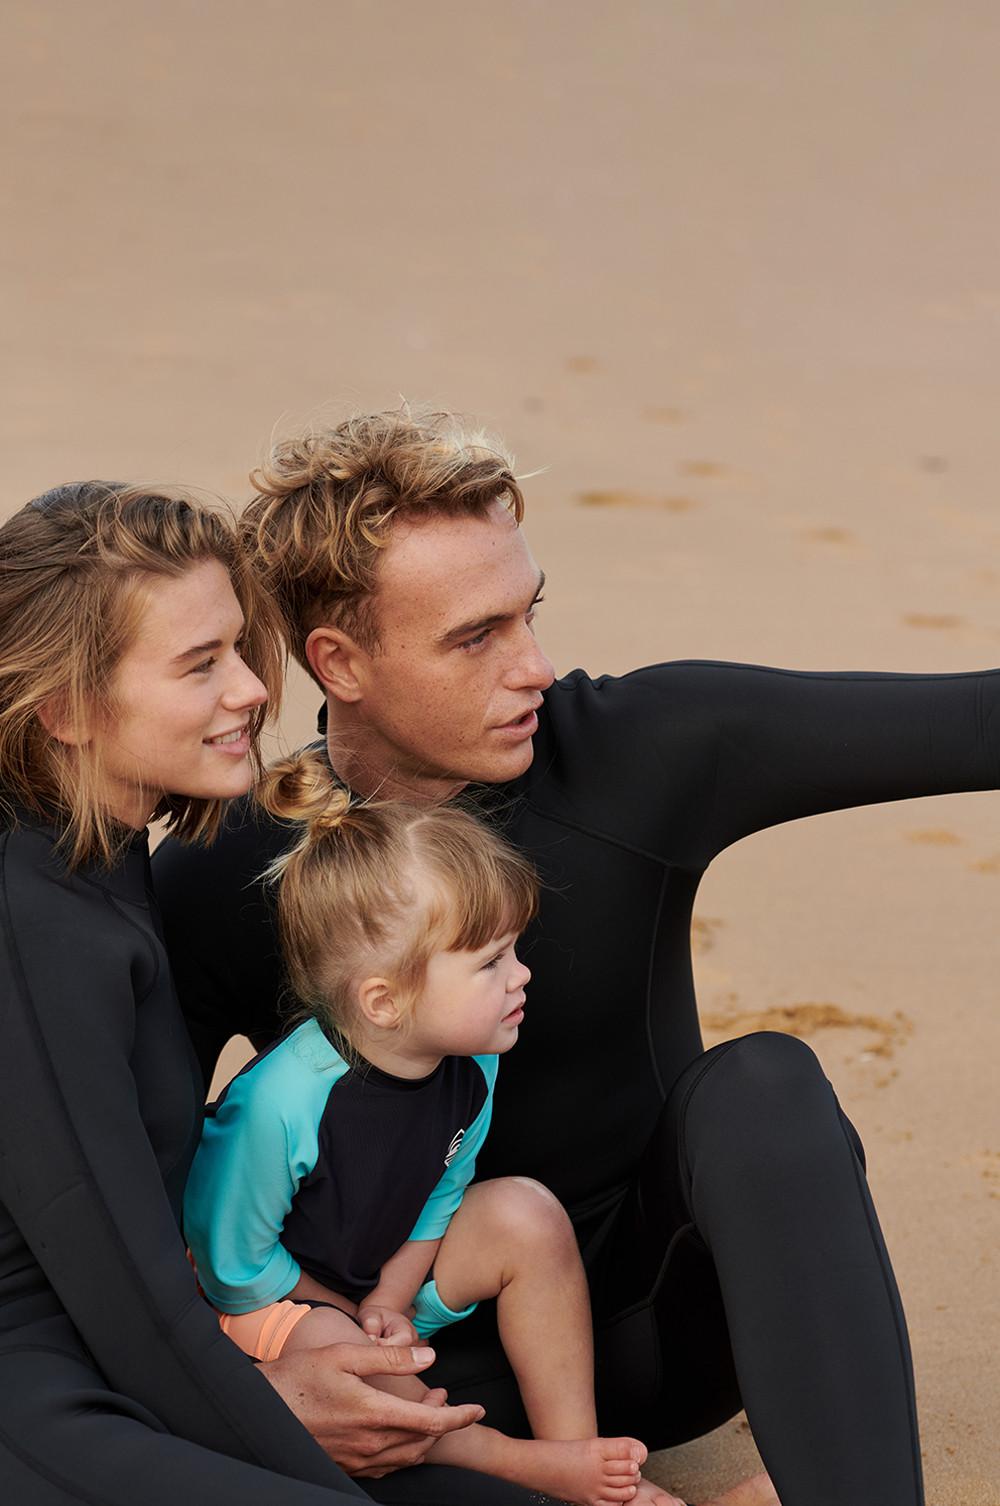 family wearing wetsuits on beach, adults wear long legged black and child wears short legged